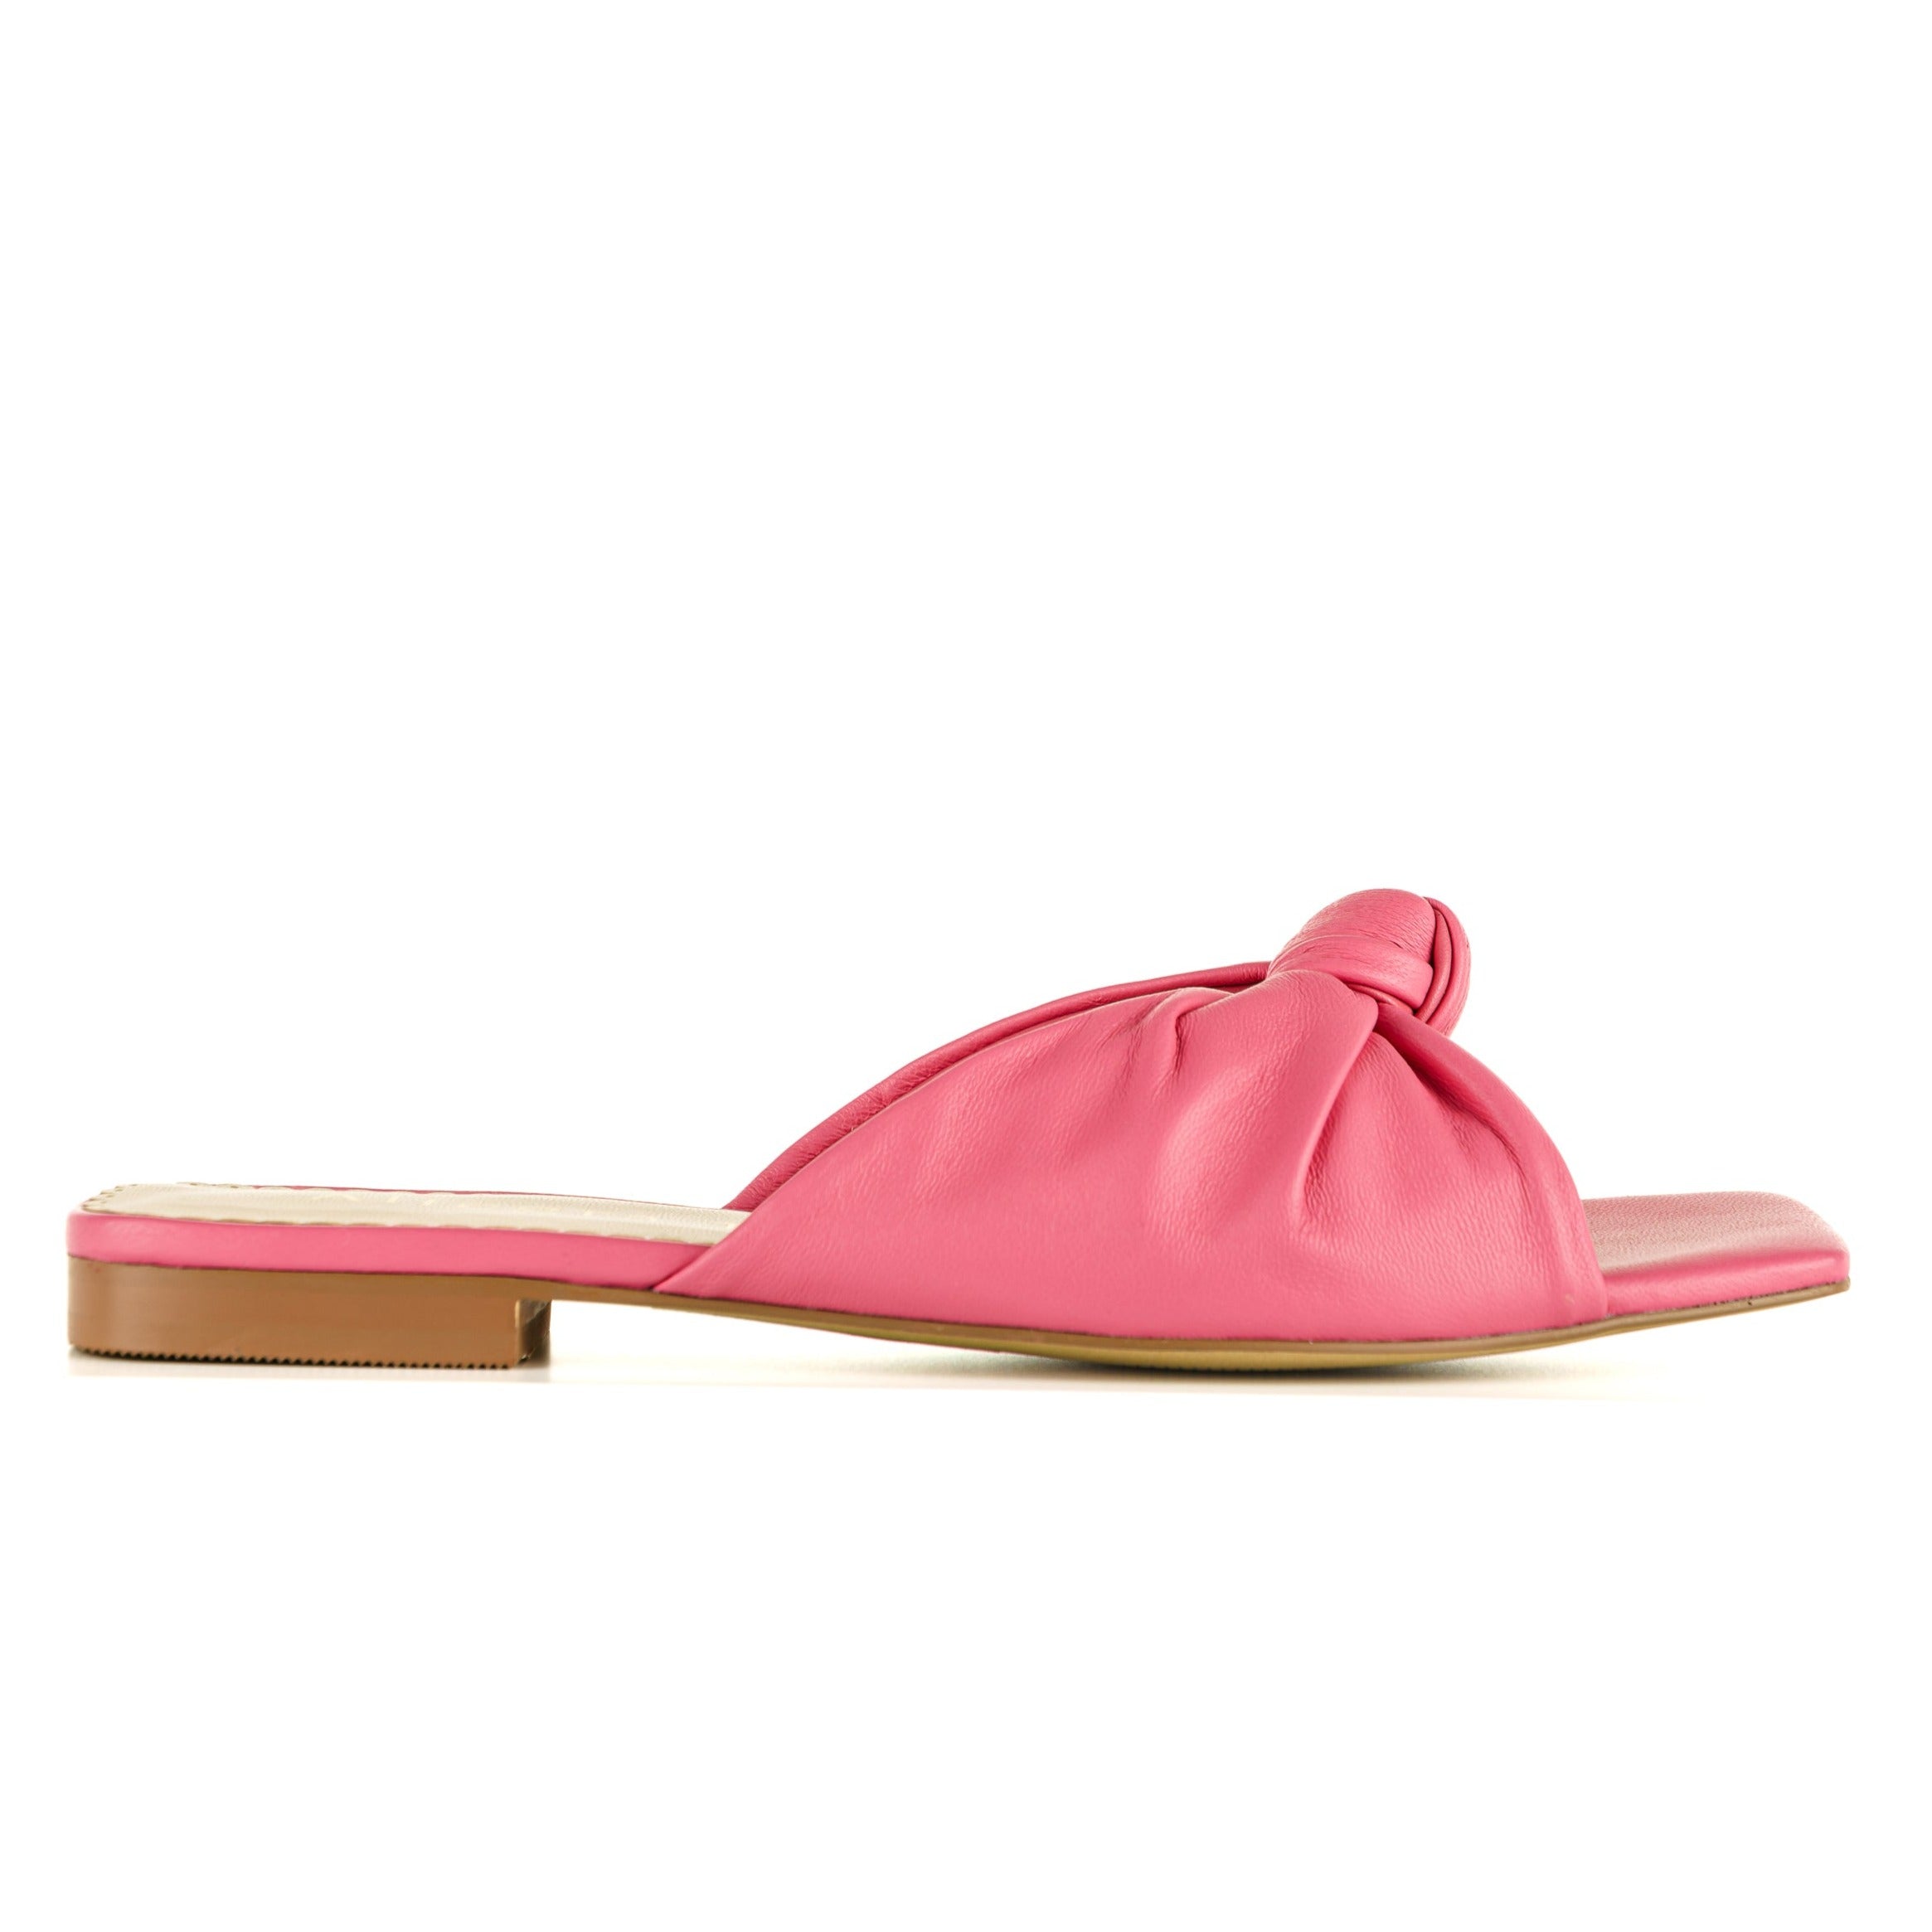 Pink women sandals with knot design upper - side view